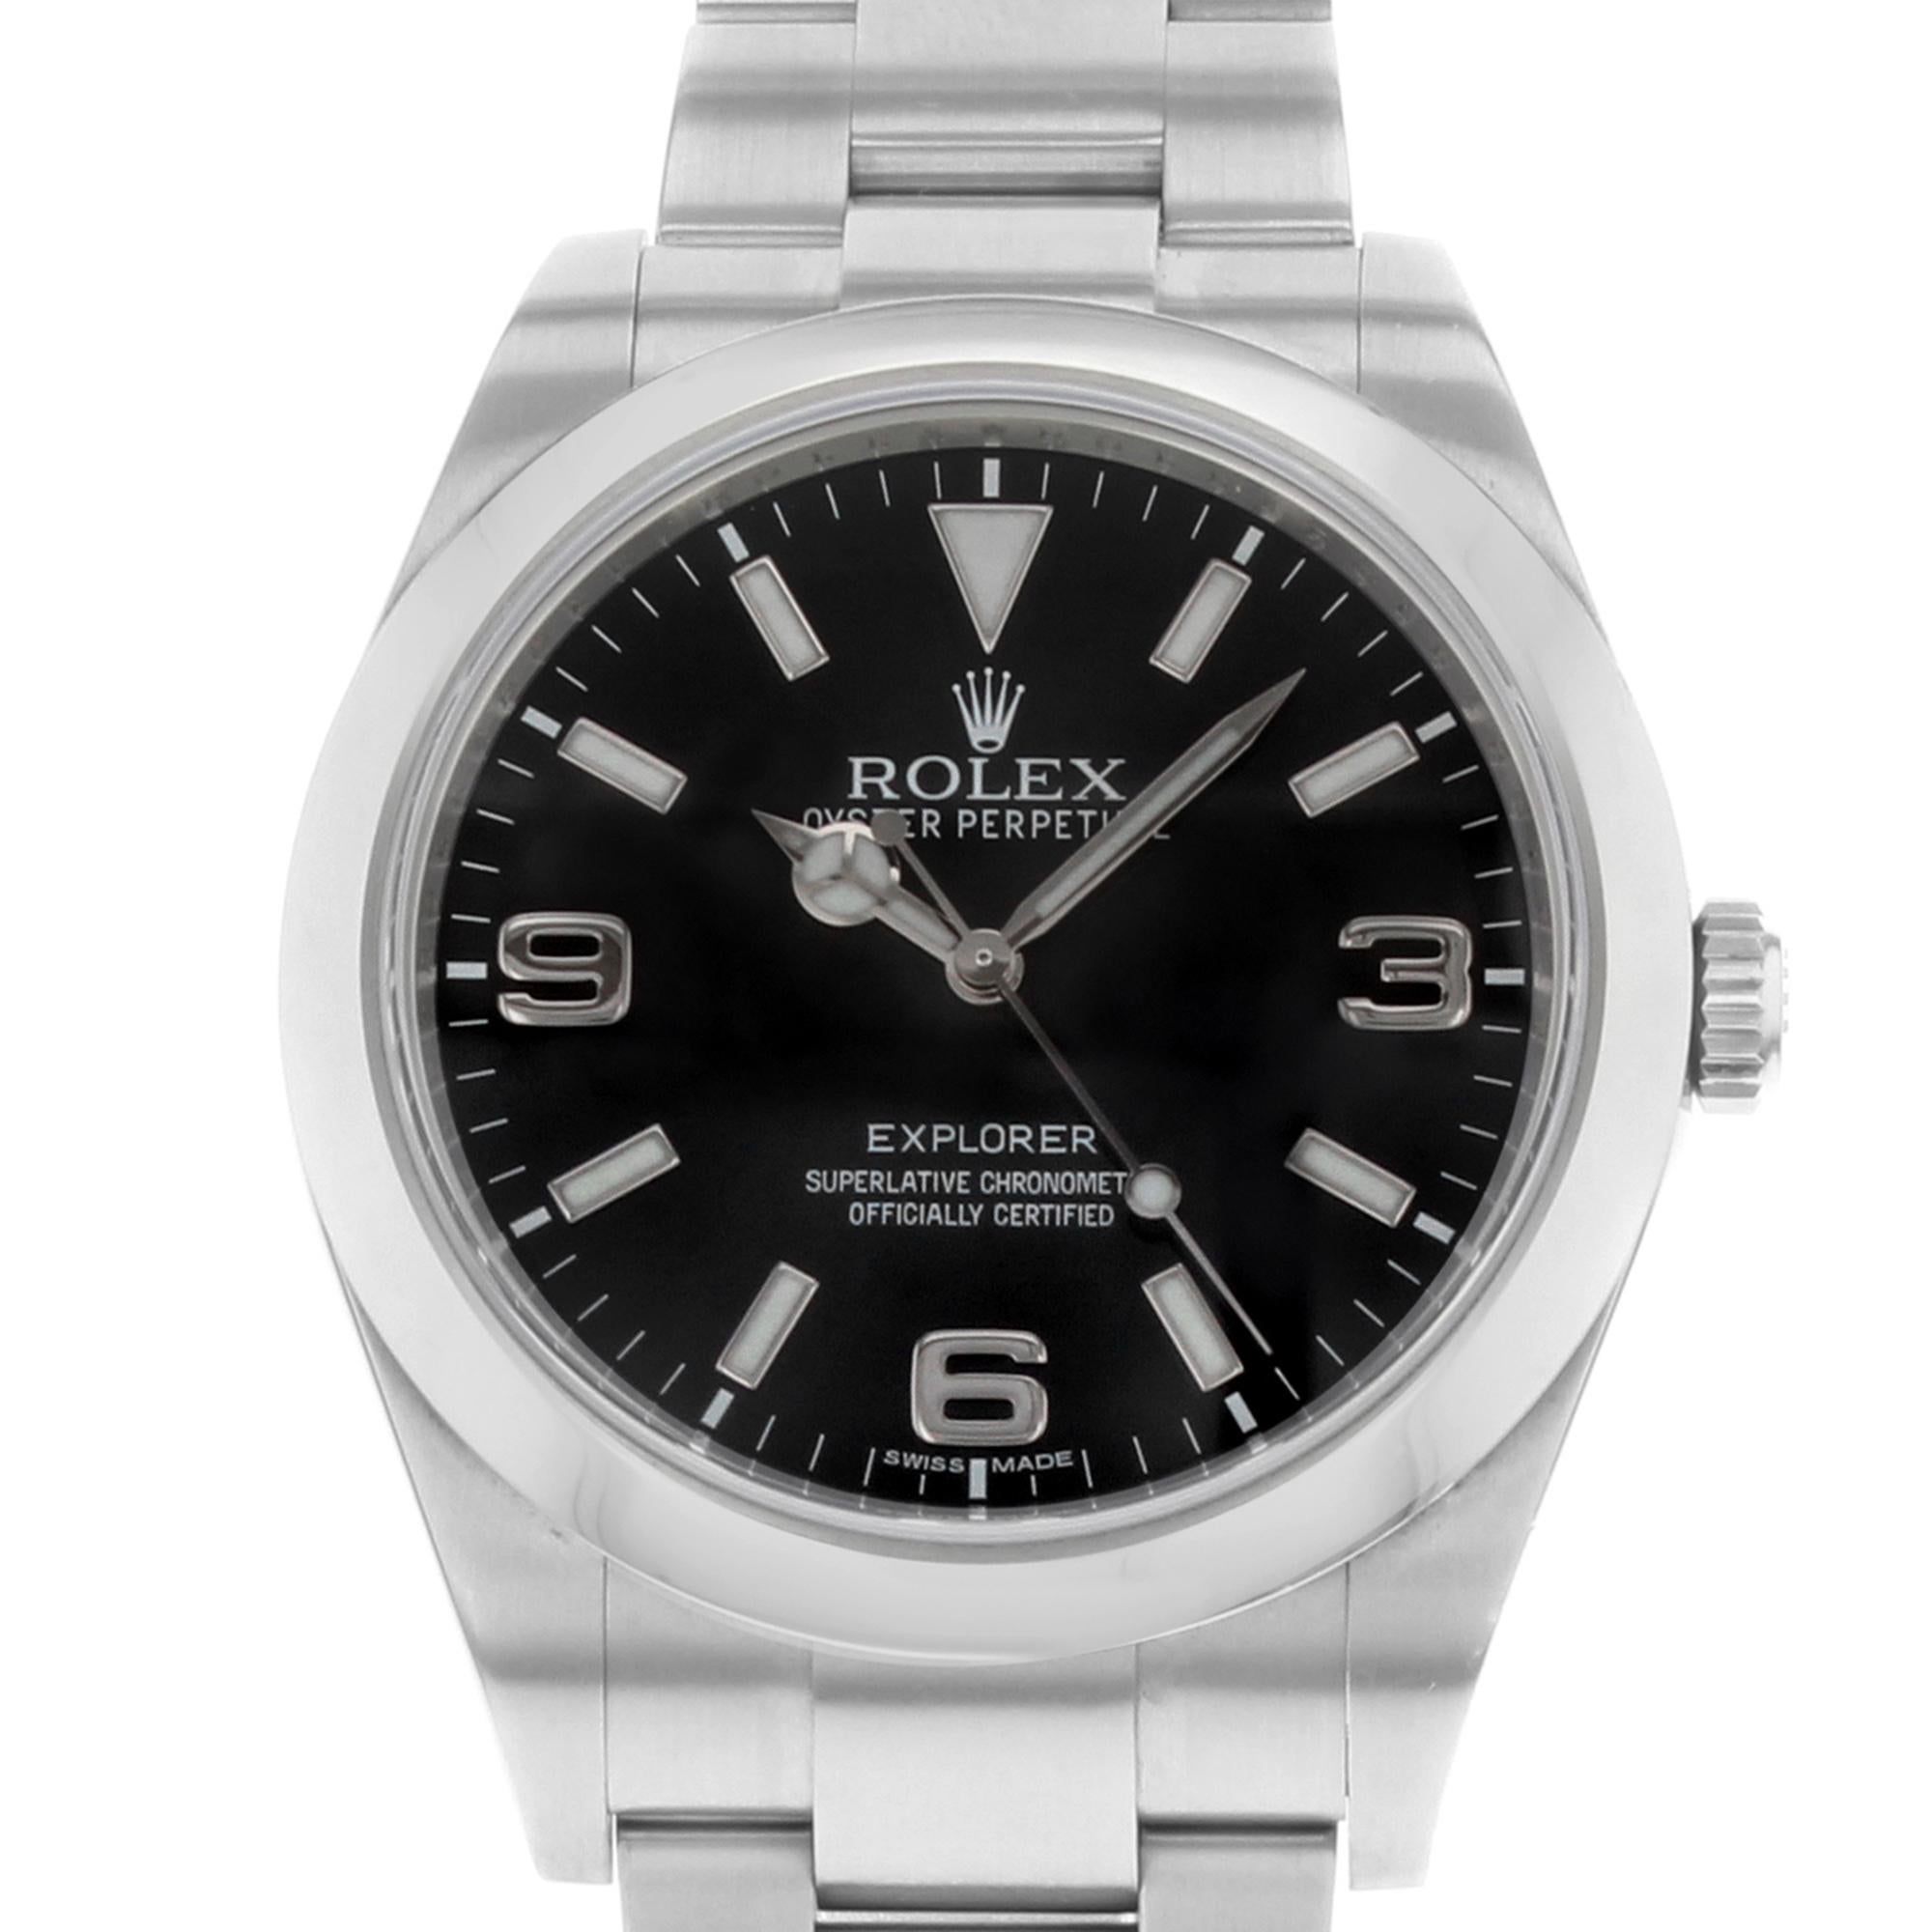 This pre-owned Rolex Explorer 214270 is a beautiful men's timepiece that is powered by a mechanical (automatic) movement which is cased in a stainless steel case. It has a round shape face, no features dial, and has hand sticks & numerals style